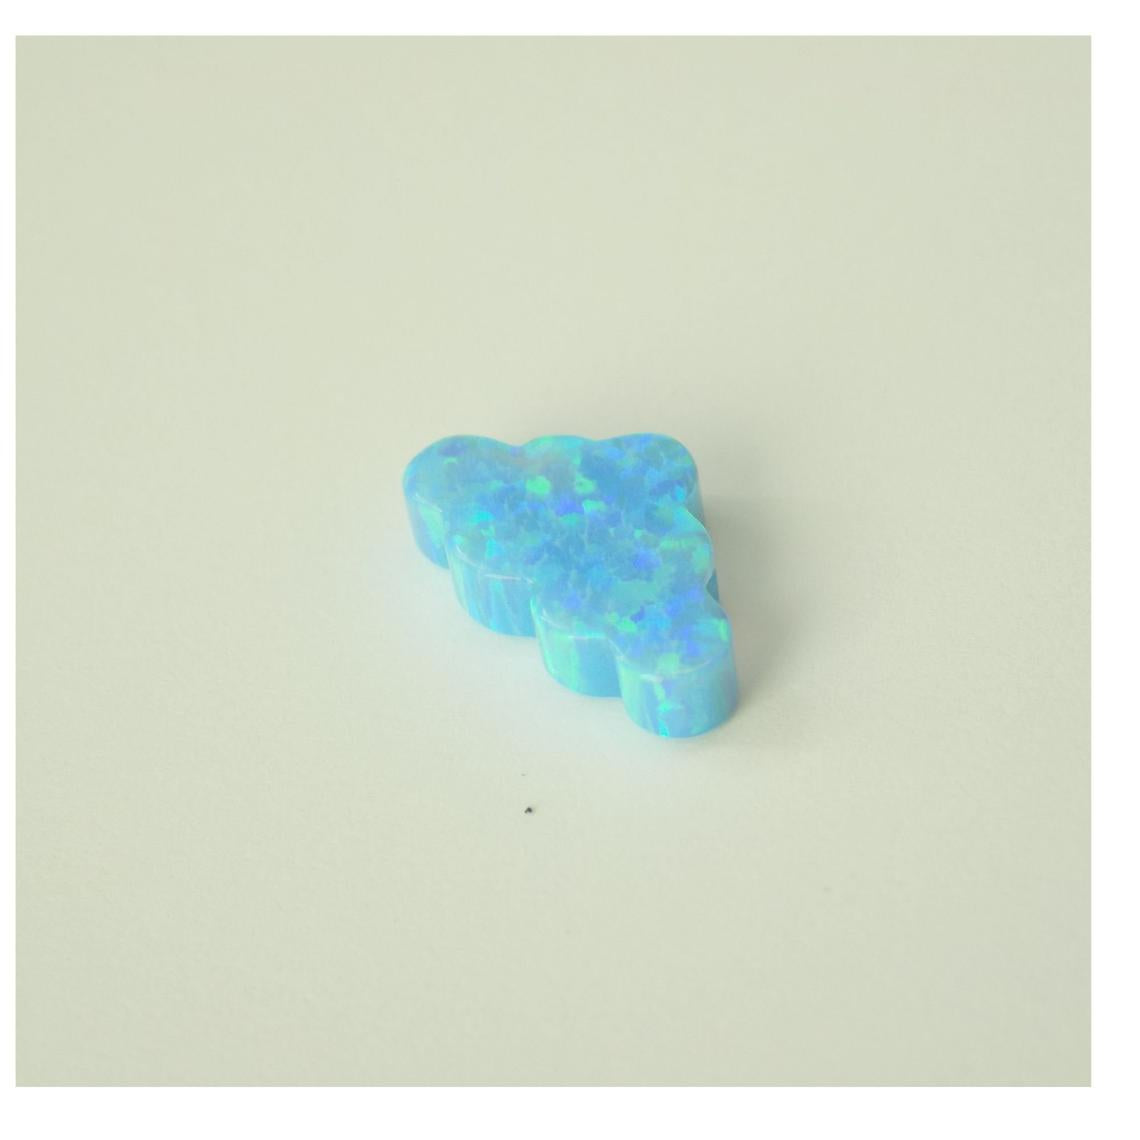 Opal Cloud Charm, White-Blue Cloud Pendant 7.3mmx12mm hole size 1.0 mm. Authentic Lab-created Opal Bead Wholesale USA Seller